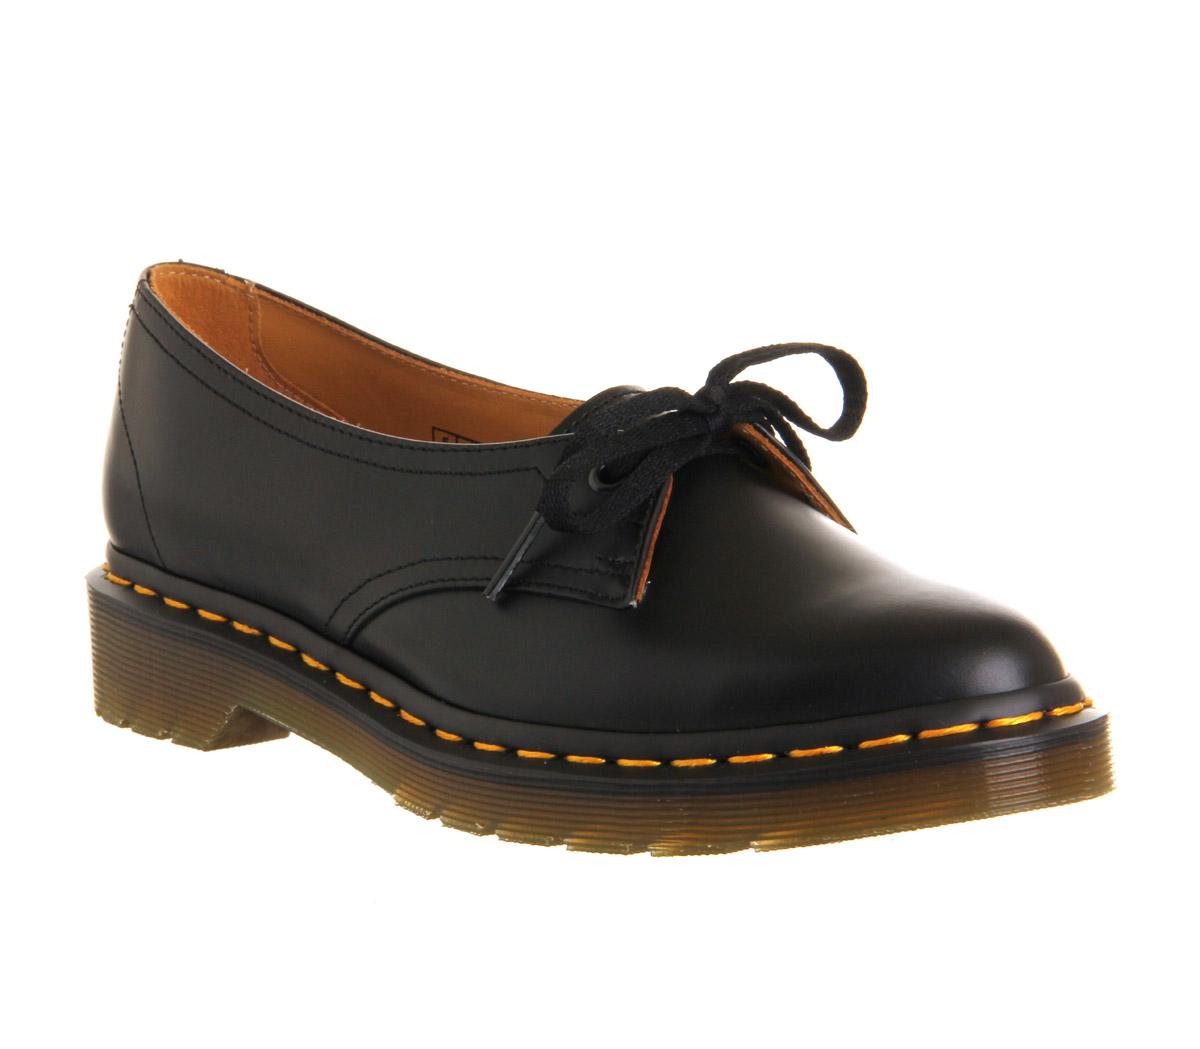 Dr. Martens Leather Core Siano Shoes in 